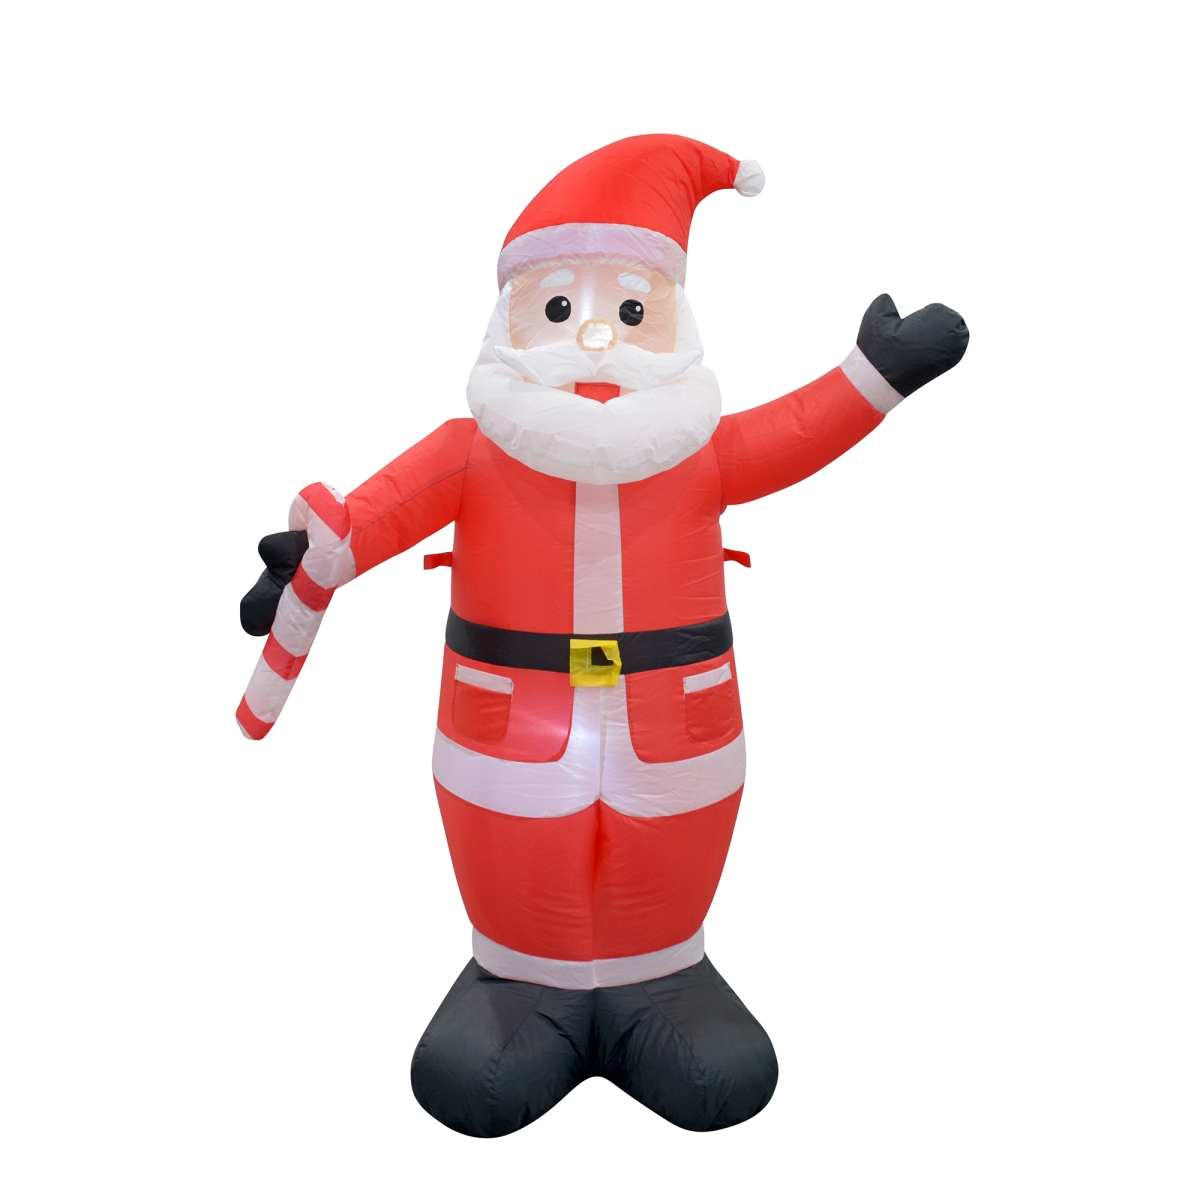 Picture of Jeco CHD-OD073 4 ft. Santa Inflatale Christmas Decoration